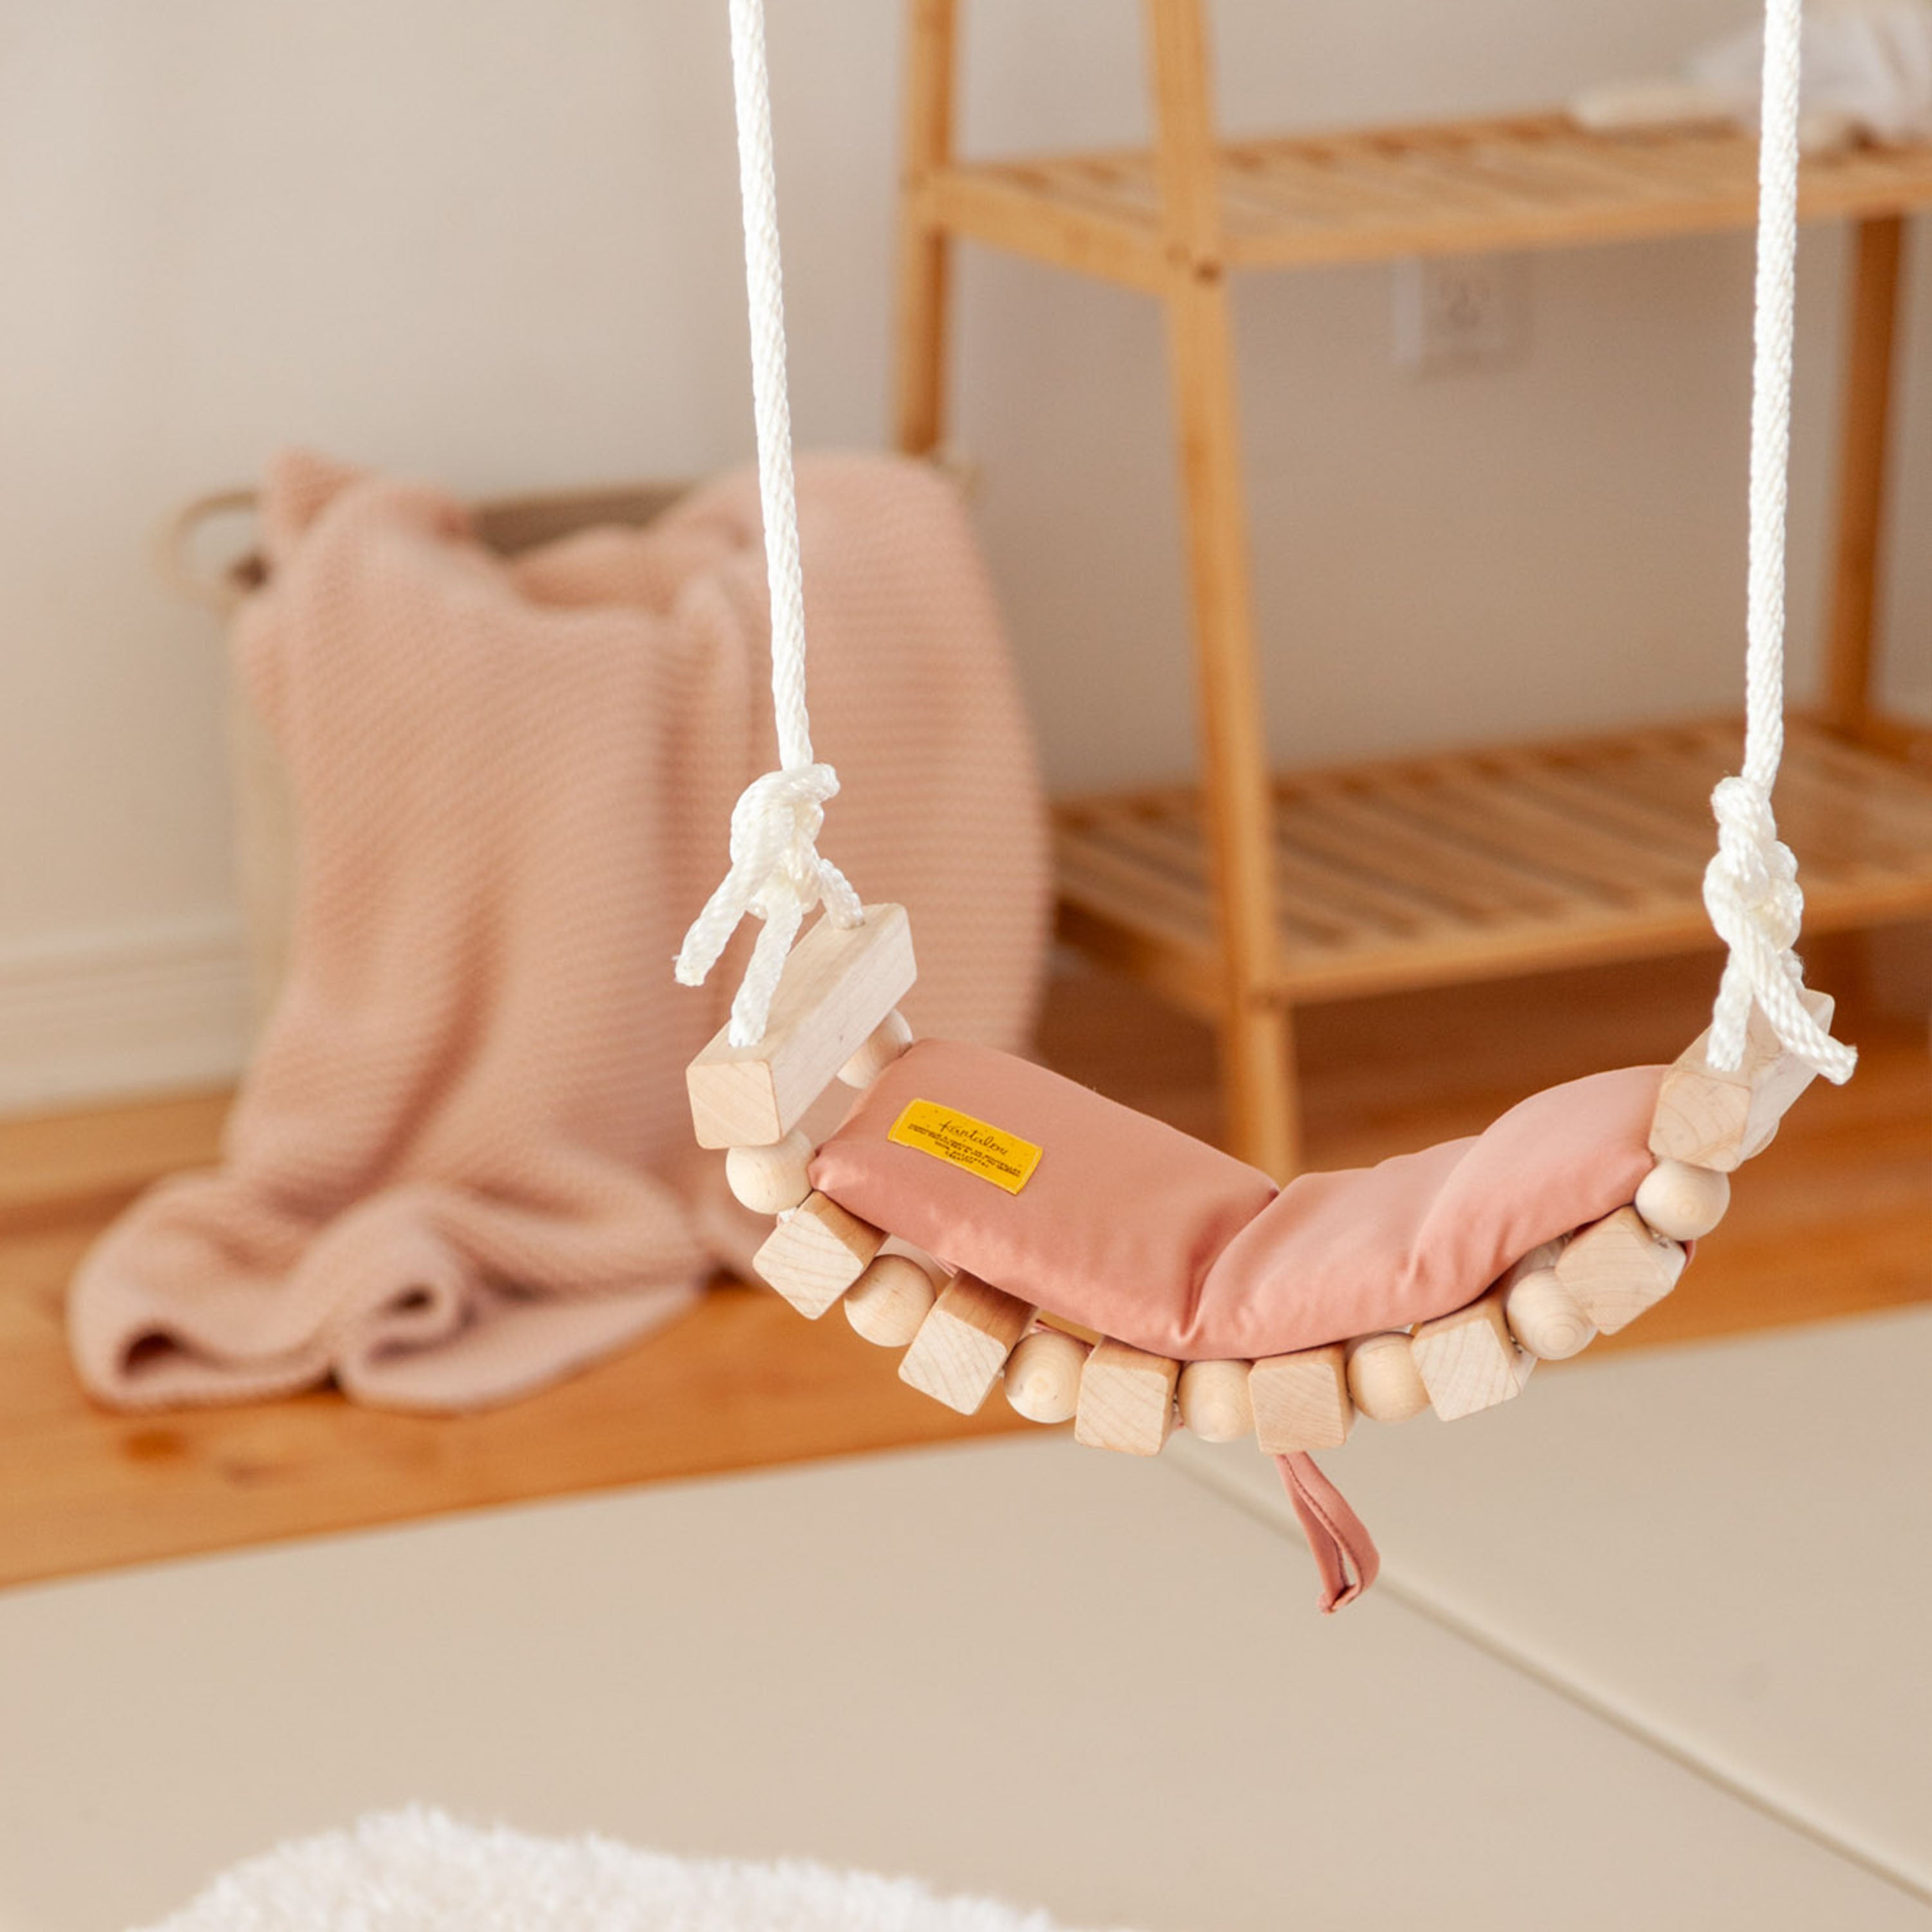 Banana swing * back mid March (without cushion)